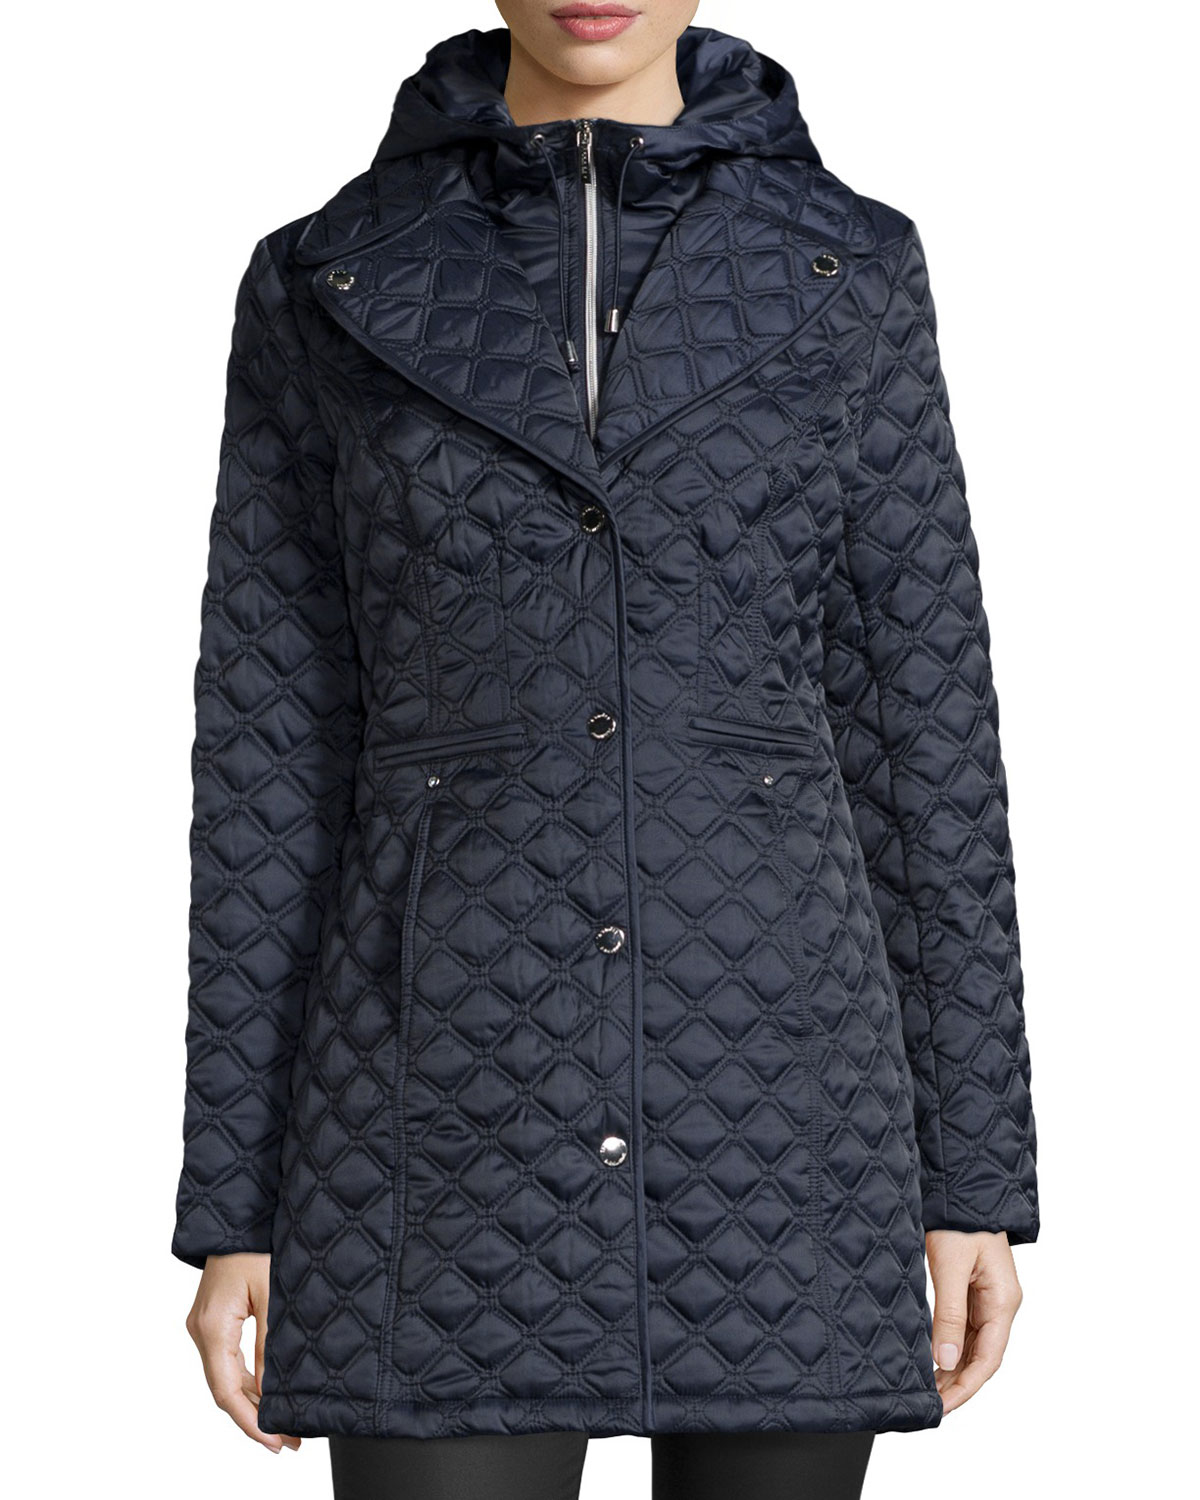 Lyst - Laundry by shelli segal Hooded Bib Quilted Coat in Blue